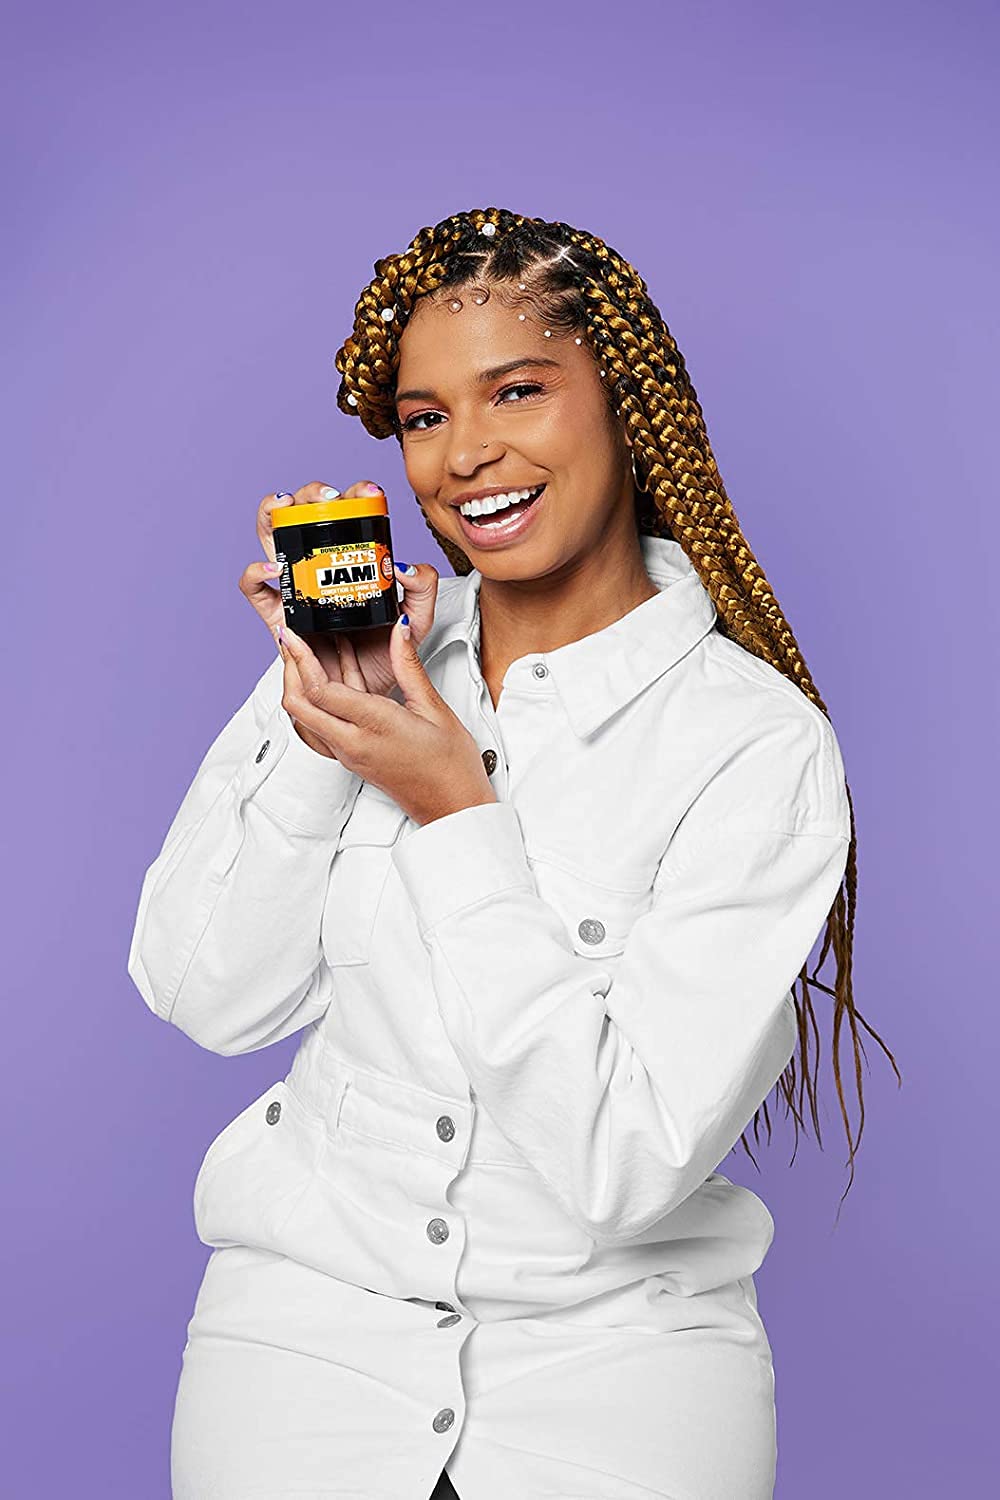 SoftSheen-Carson Let's Jam! Shining and Conditioning Hair Gel by Dark and Lovely, Extra Hold, All Hair Types, Styling Gel Great for Braiding, Twisting & Smooth Edges, Extra Hold, 4.4 oz